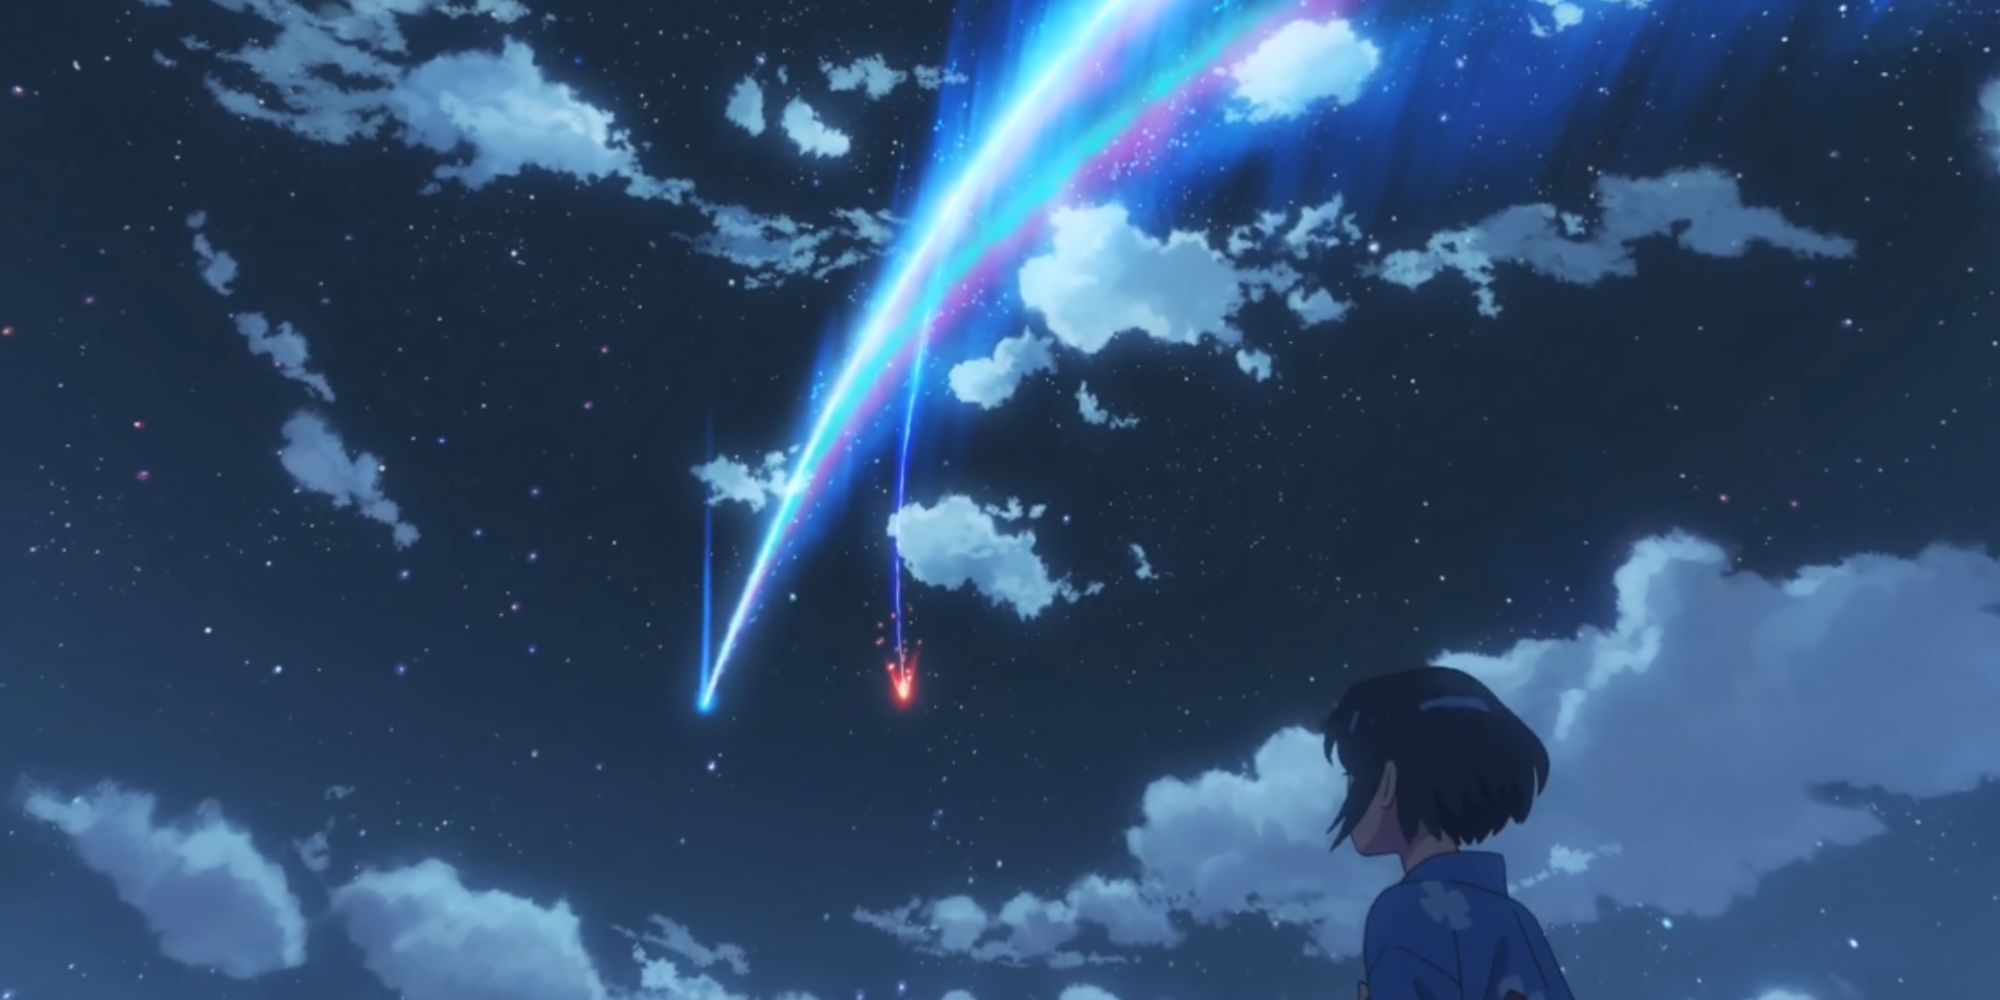 Top 5 Anime Festival Episodes - I drink and watch anime  Fireworks art,  Fireworks photography, Fireworks background